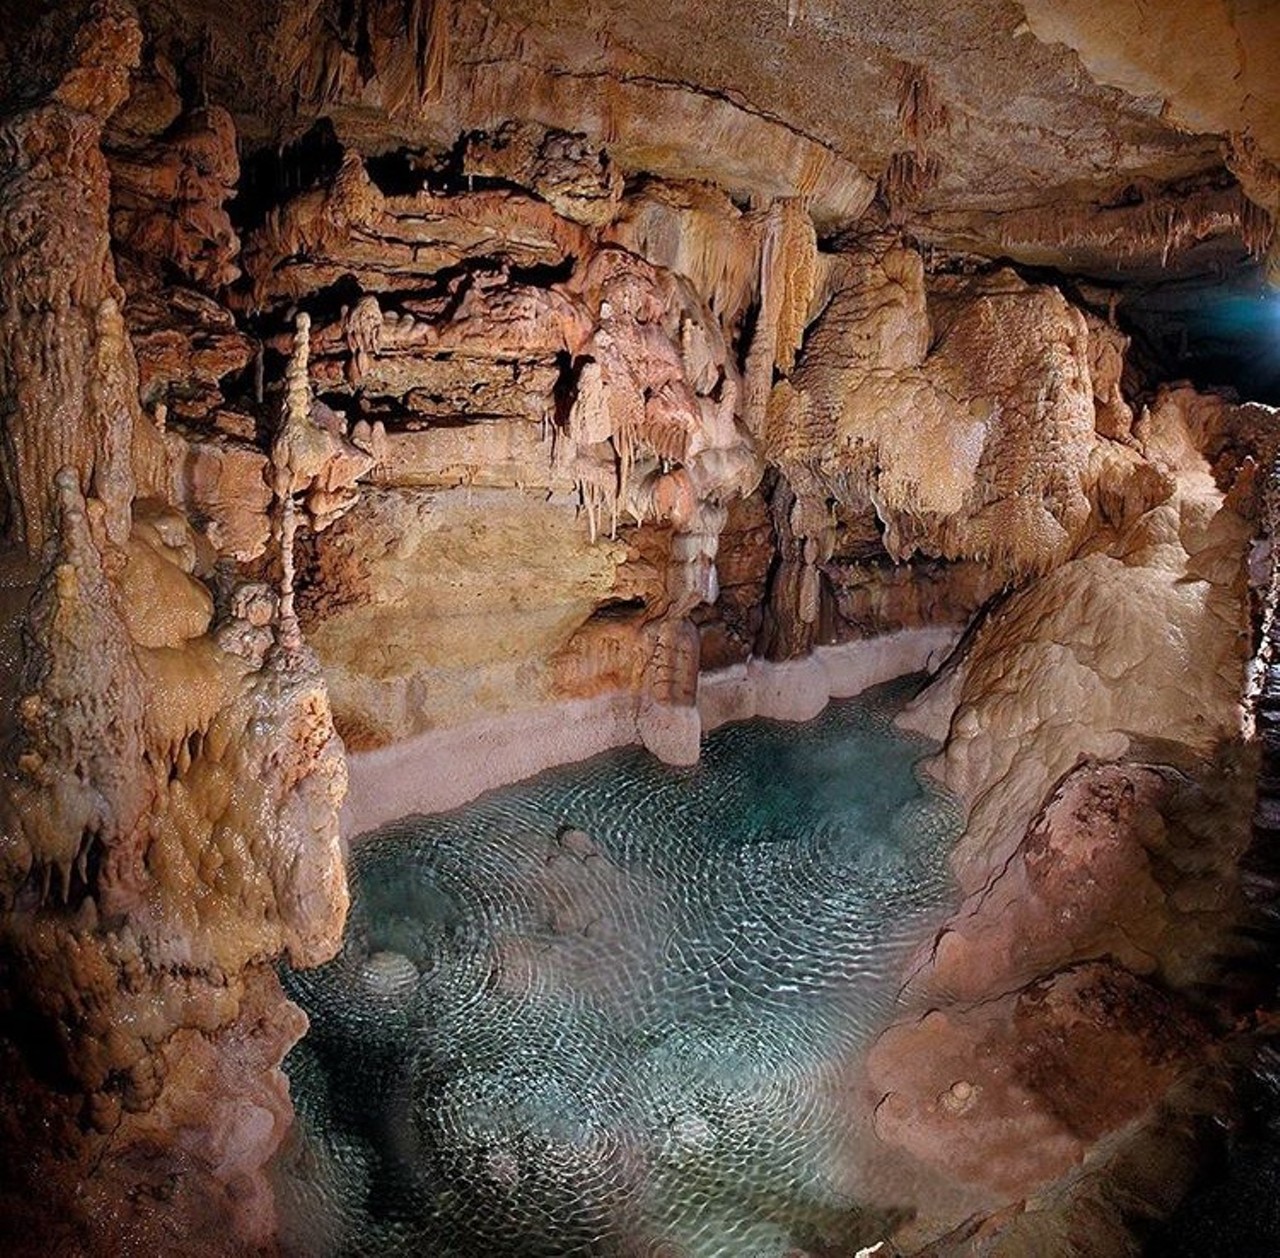 Natural Bridge Caverns
26496 Natural Bridge Caverns Rd, (210) 651-6101, naturalbridgecaverns.com
While this location is technically not indoors, the dark, cool caves found within the caverns provide a beautiful escape from the Texas heat. 
Photo via Instagram / naturalbridgecaverns